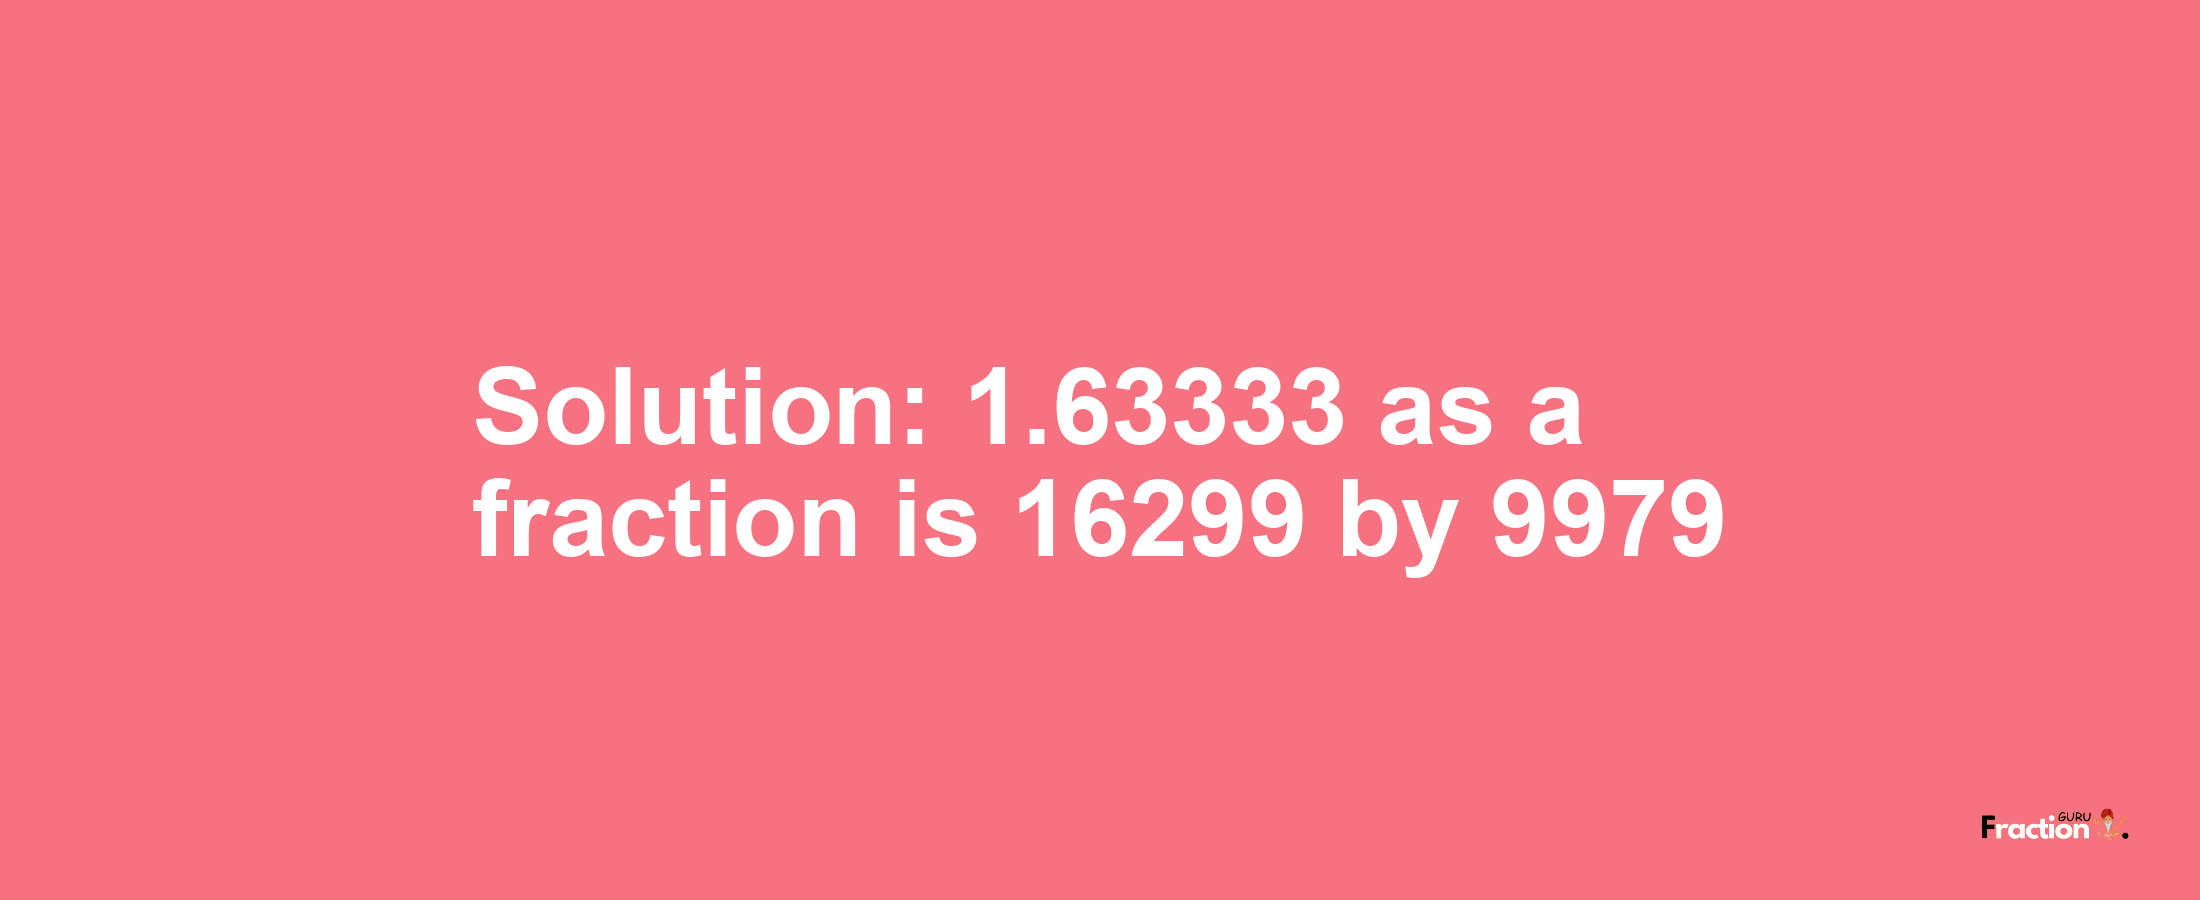 Solution:1.63333 as a fraction is 16299/9979